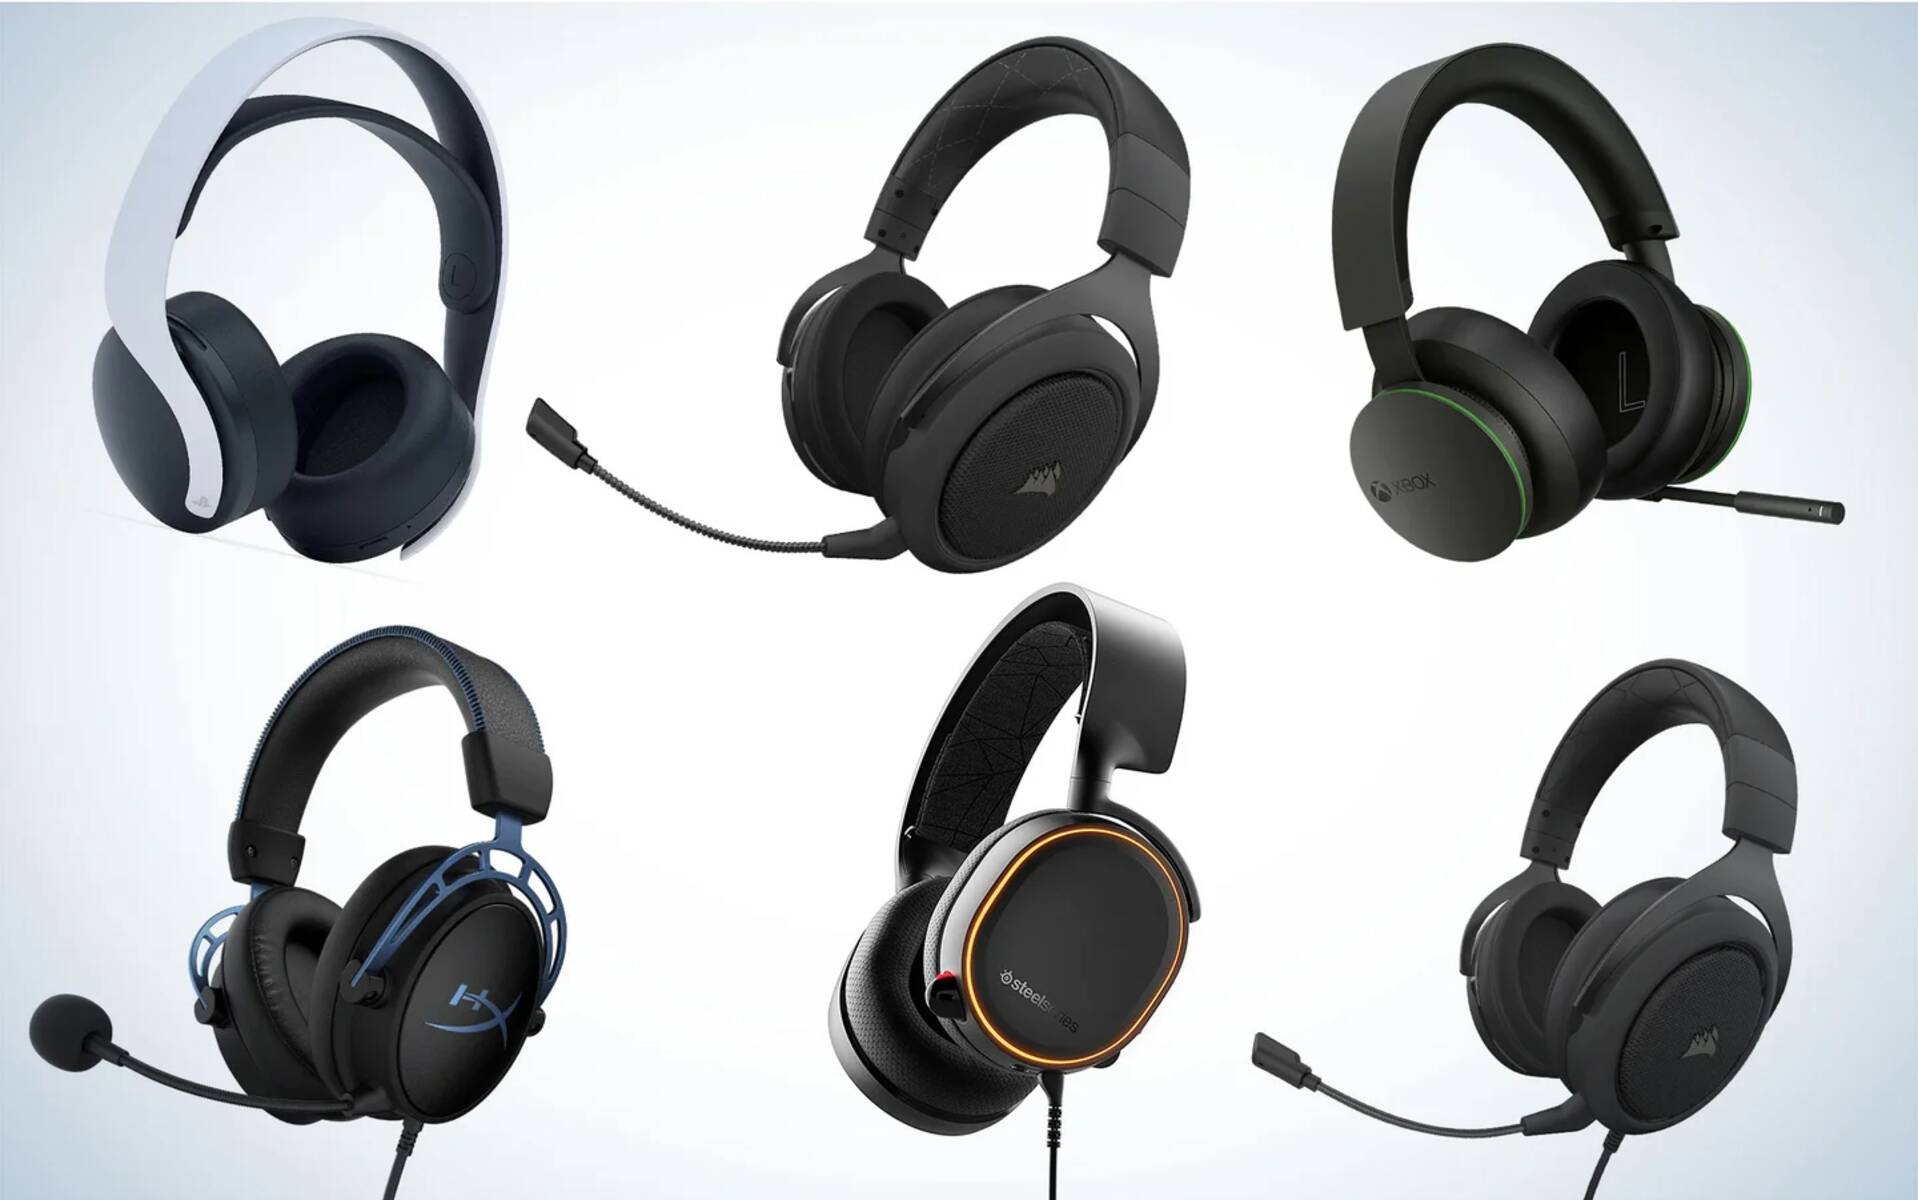 What Is The Best Gaming Headset Brand